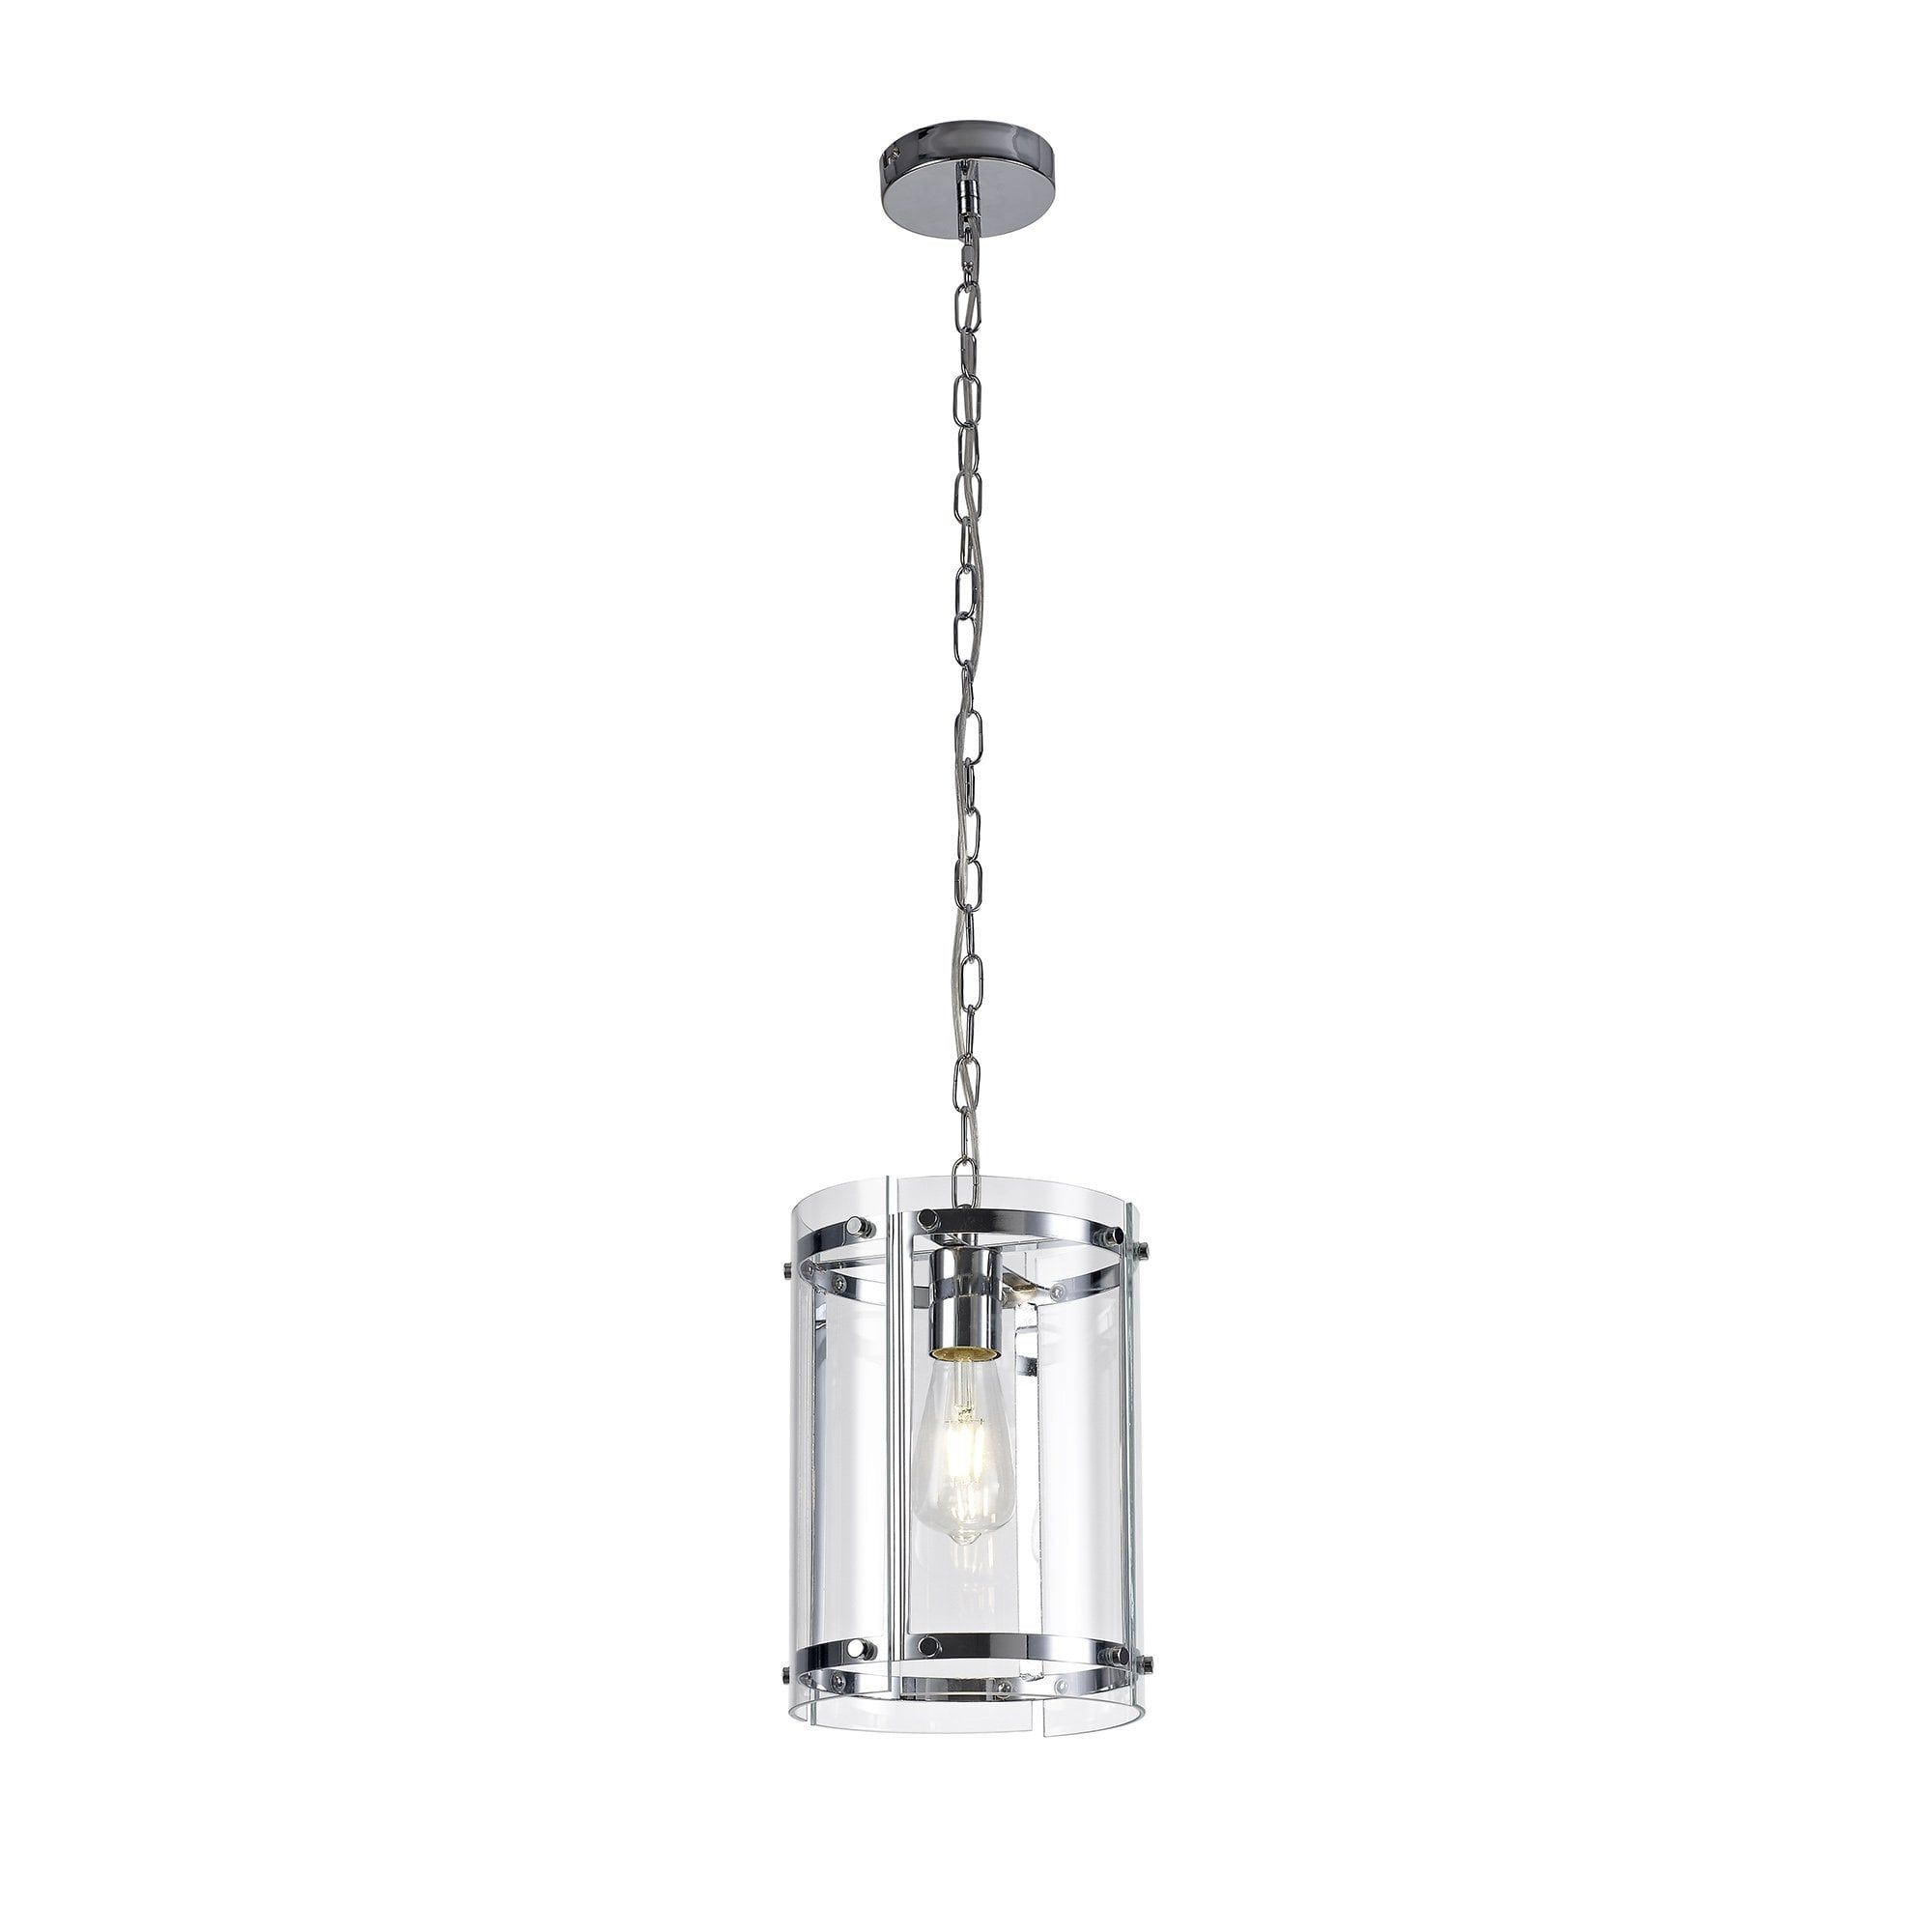 Chrome Lantern Chandeliers With Regard To Widely Used Ceiling Pendant Lantern In Polished Chrome With Glass Panels (View 5 of 10)